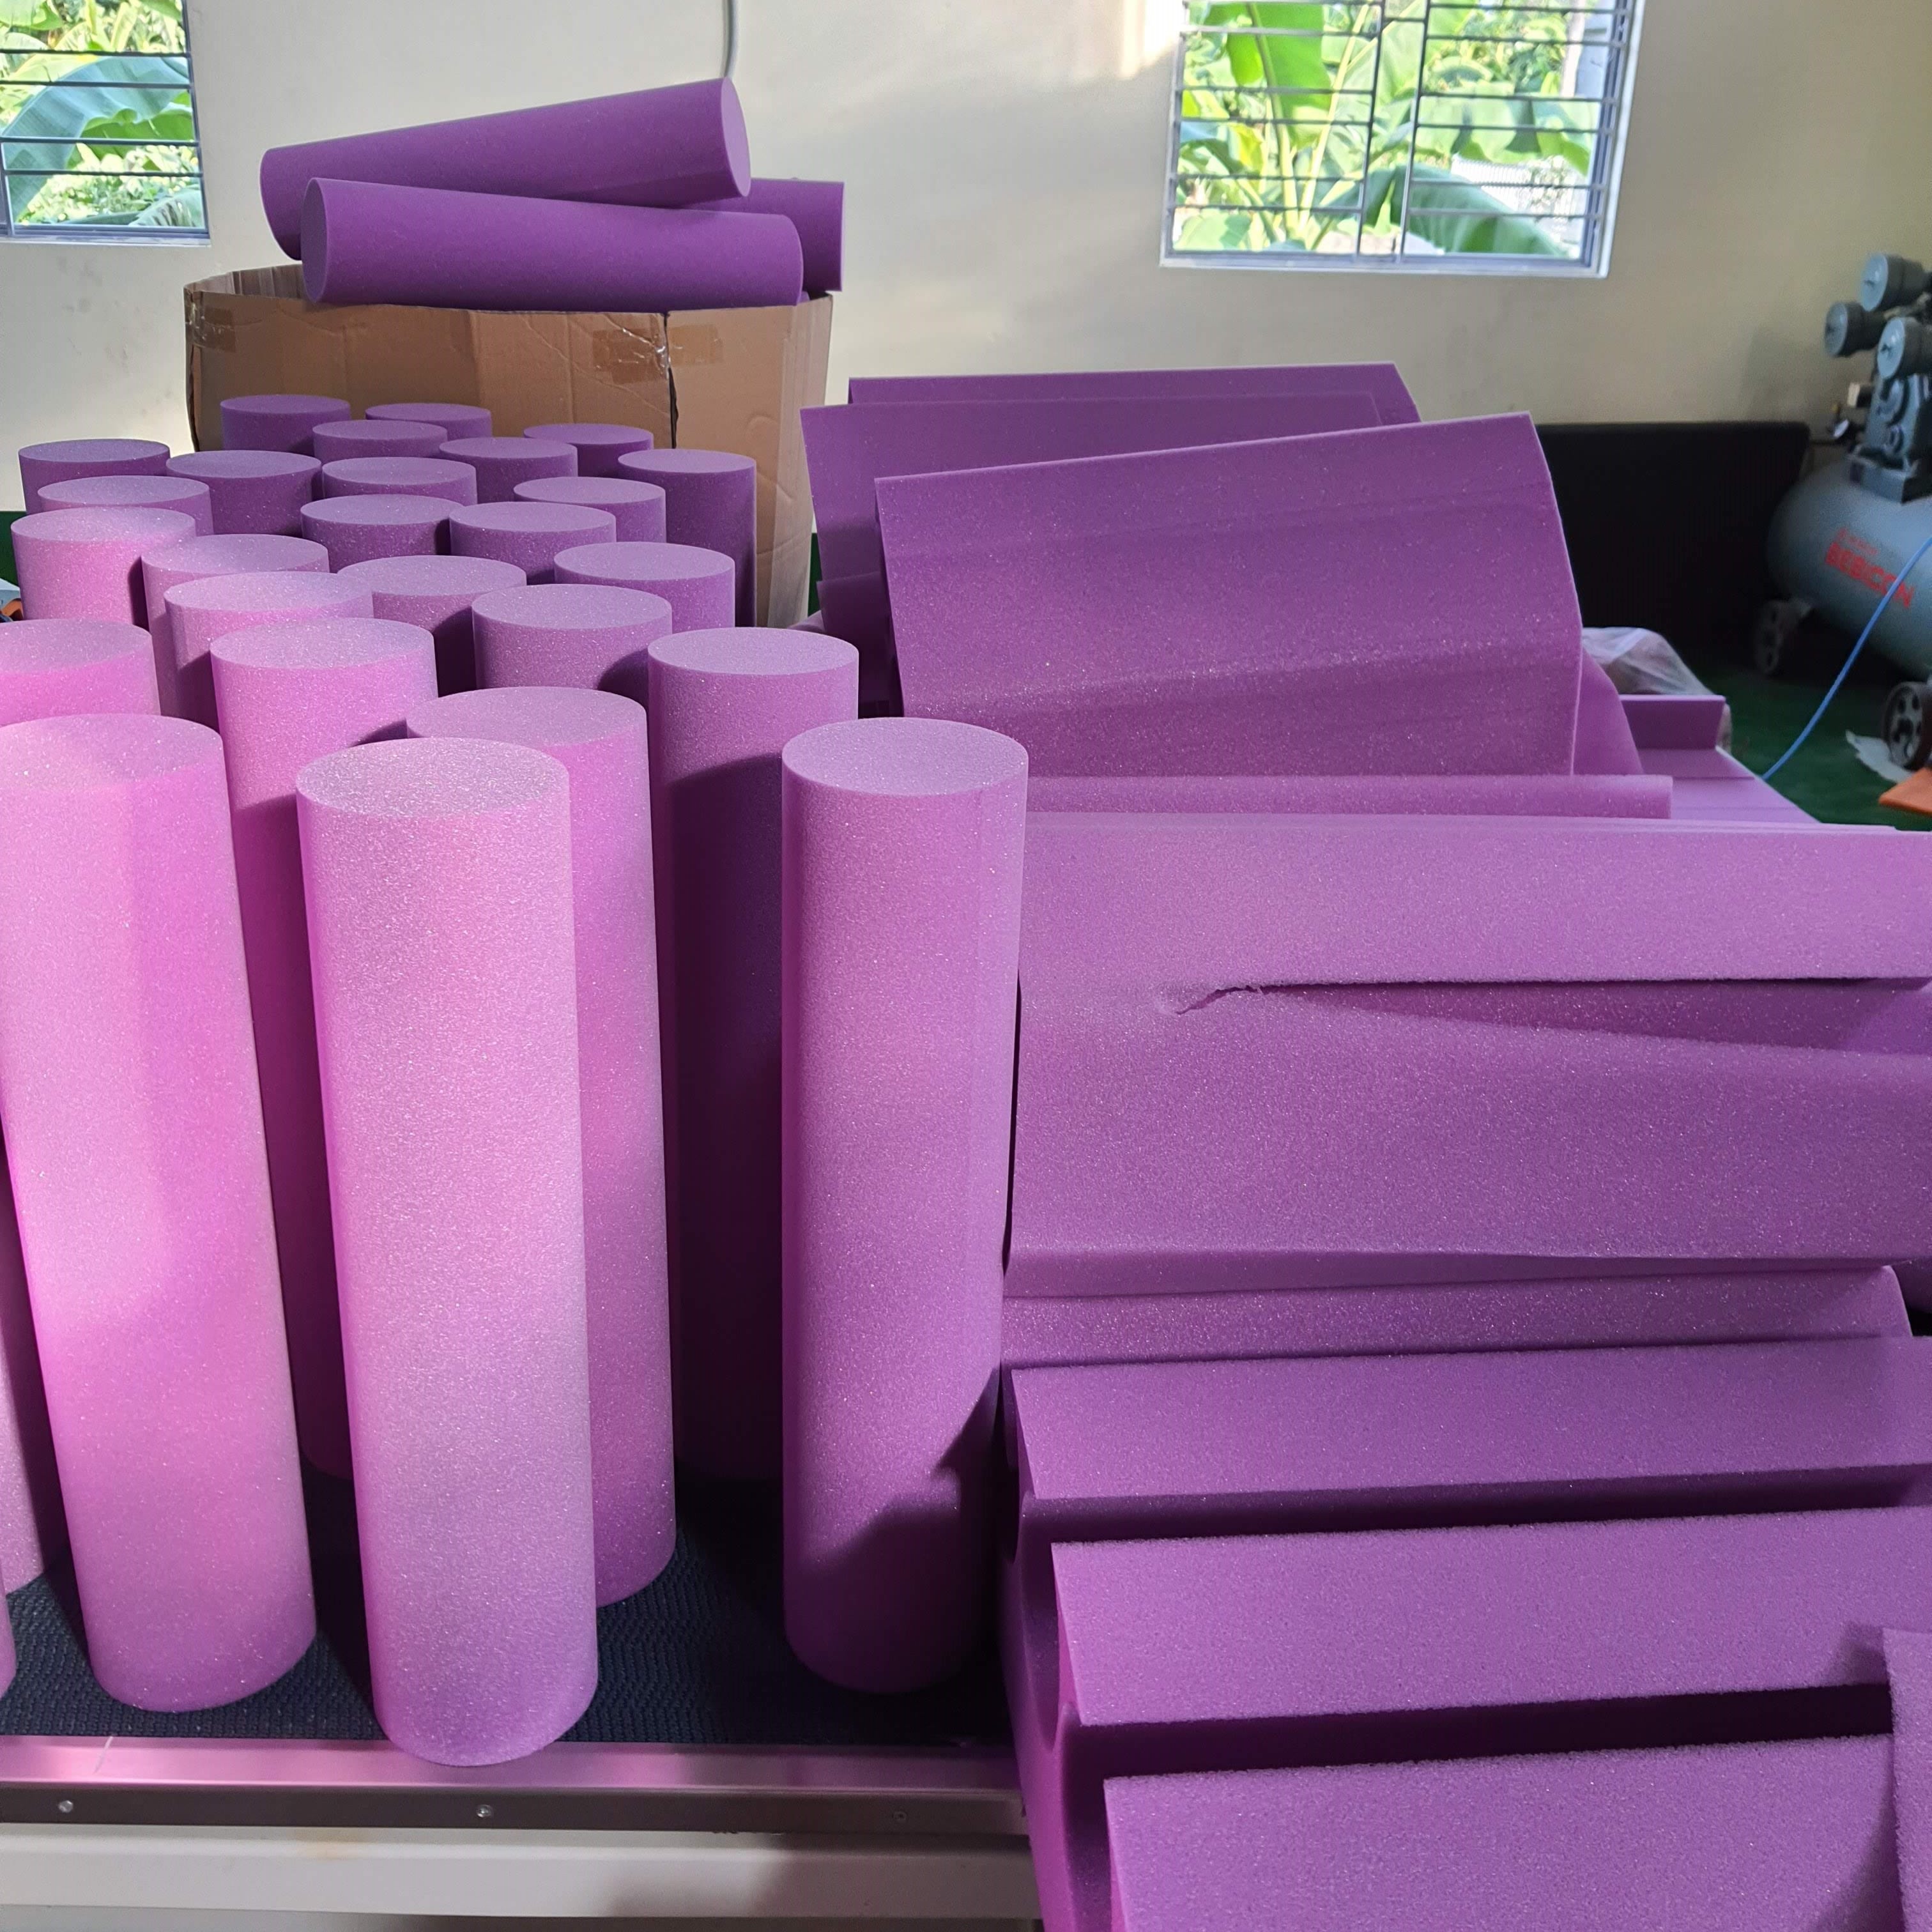  View larger image Add to Compare  Share Polyurethane Foam Good Quality Excellent Materials Home Goods PU Carton Made in Vietnam Manufacturer 8